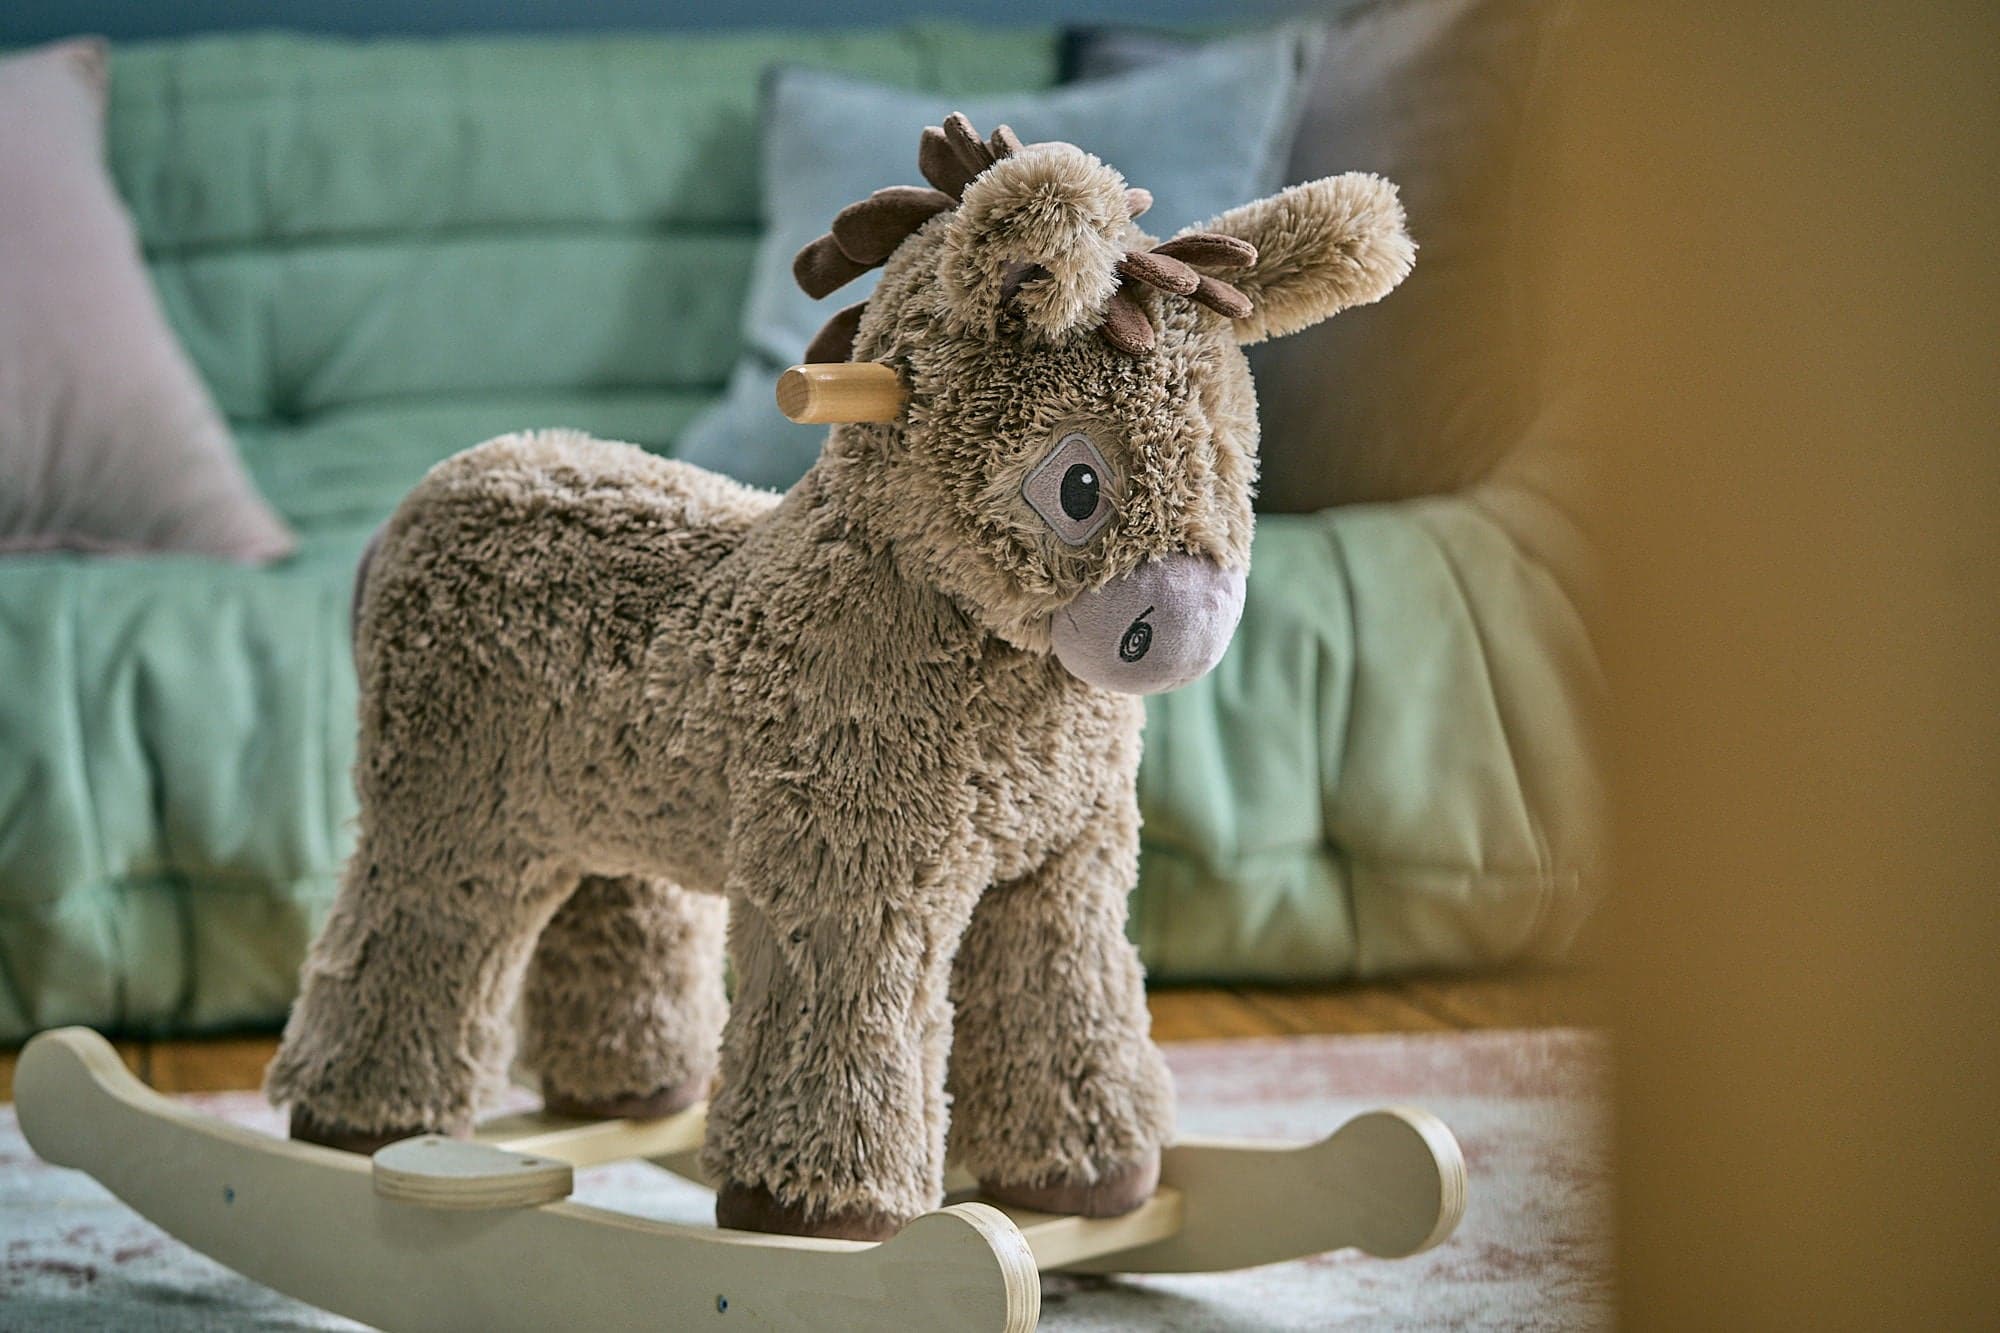 Little Bird Told Me Norbert Rocking Donkey (9m+) - For Your Little One